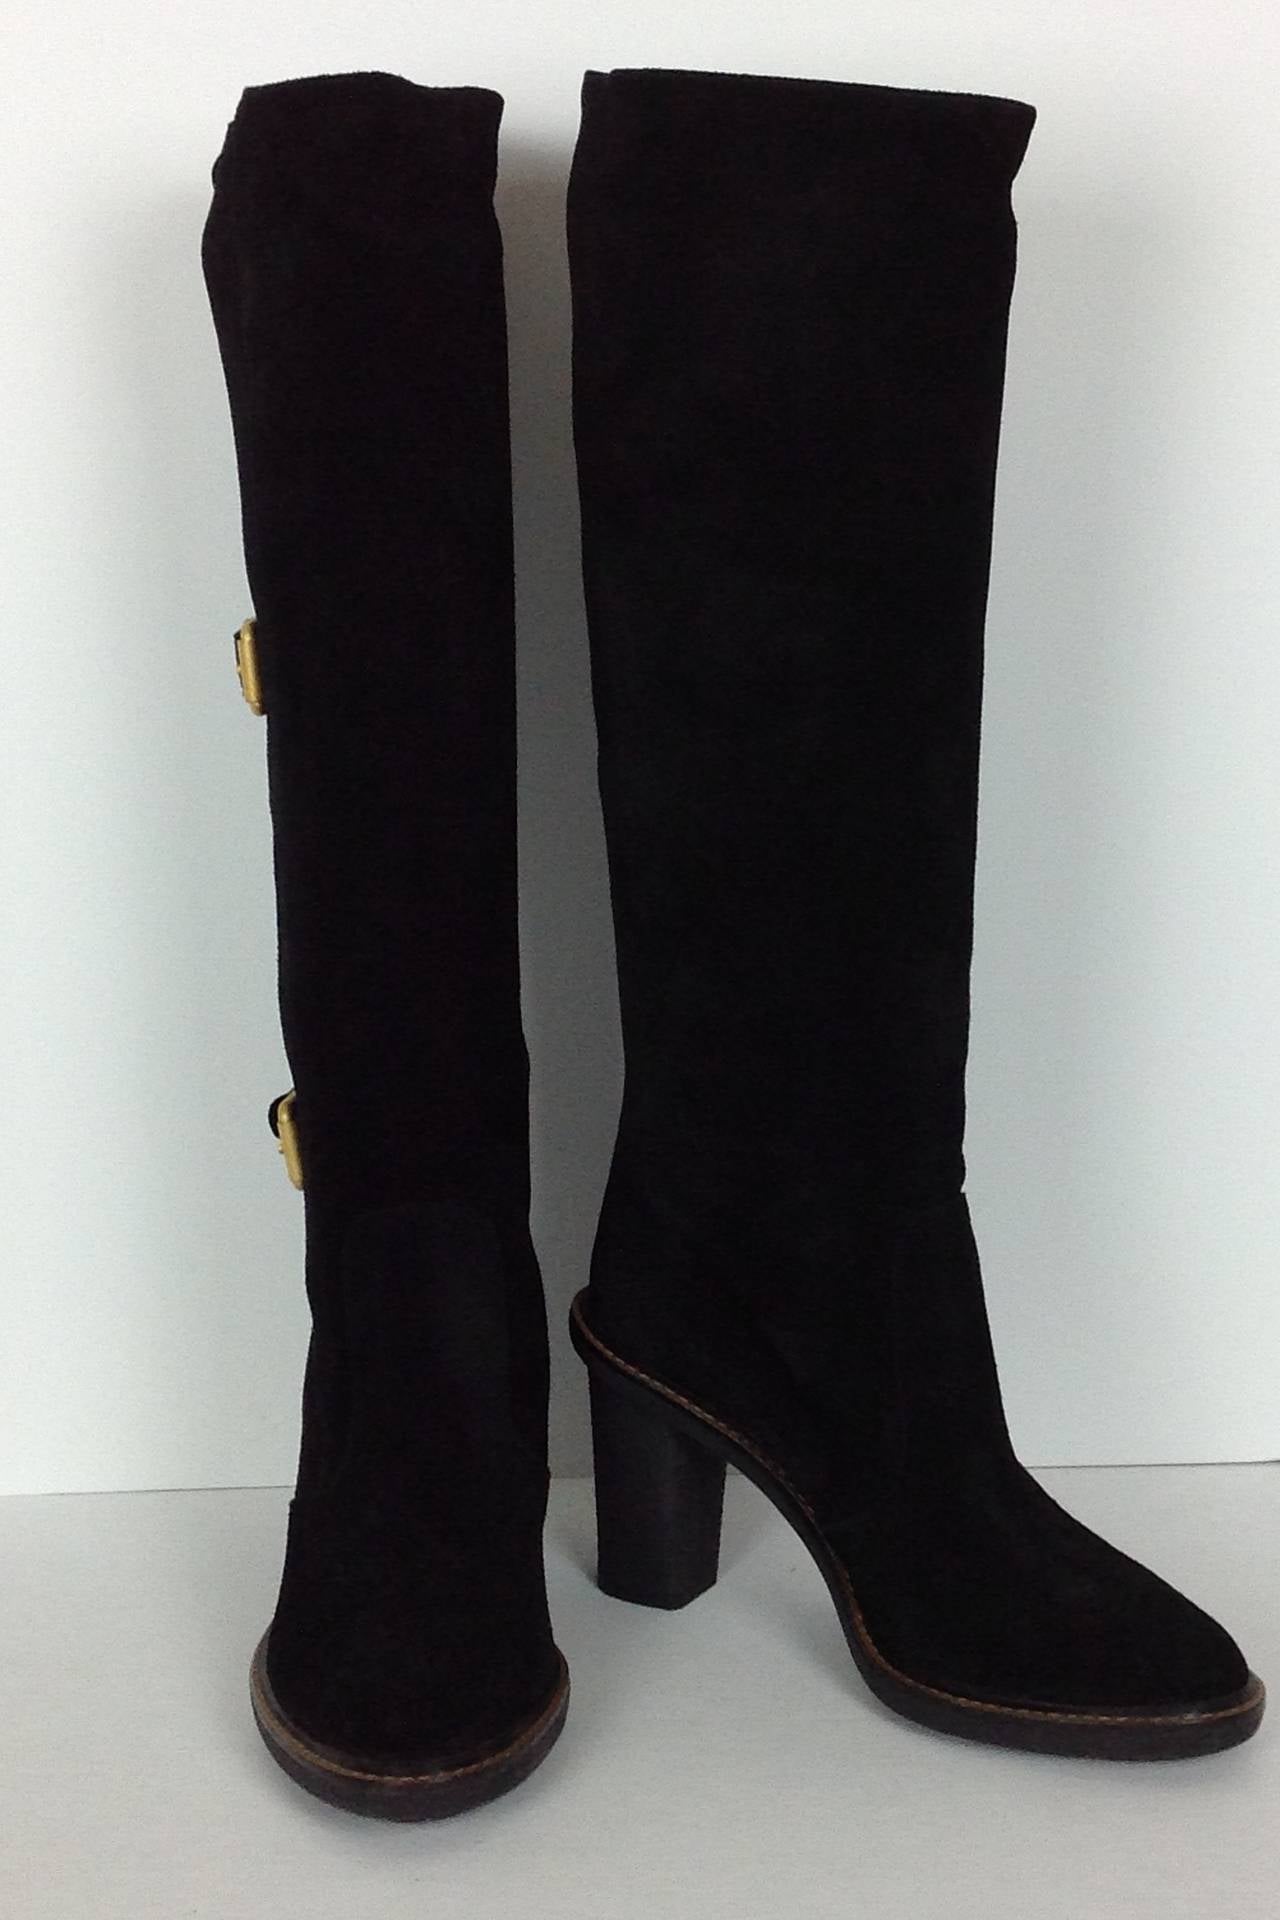 Women's Fendi black suede buckle boots  NEW                  Size 41 For Sale